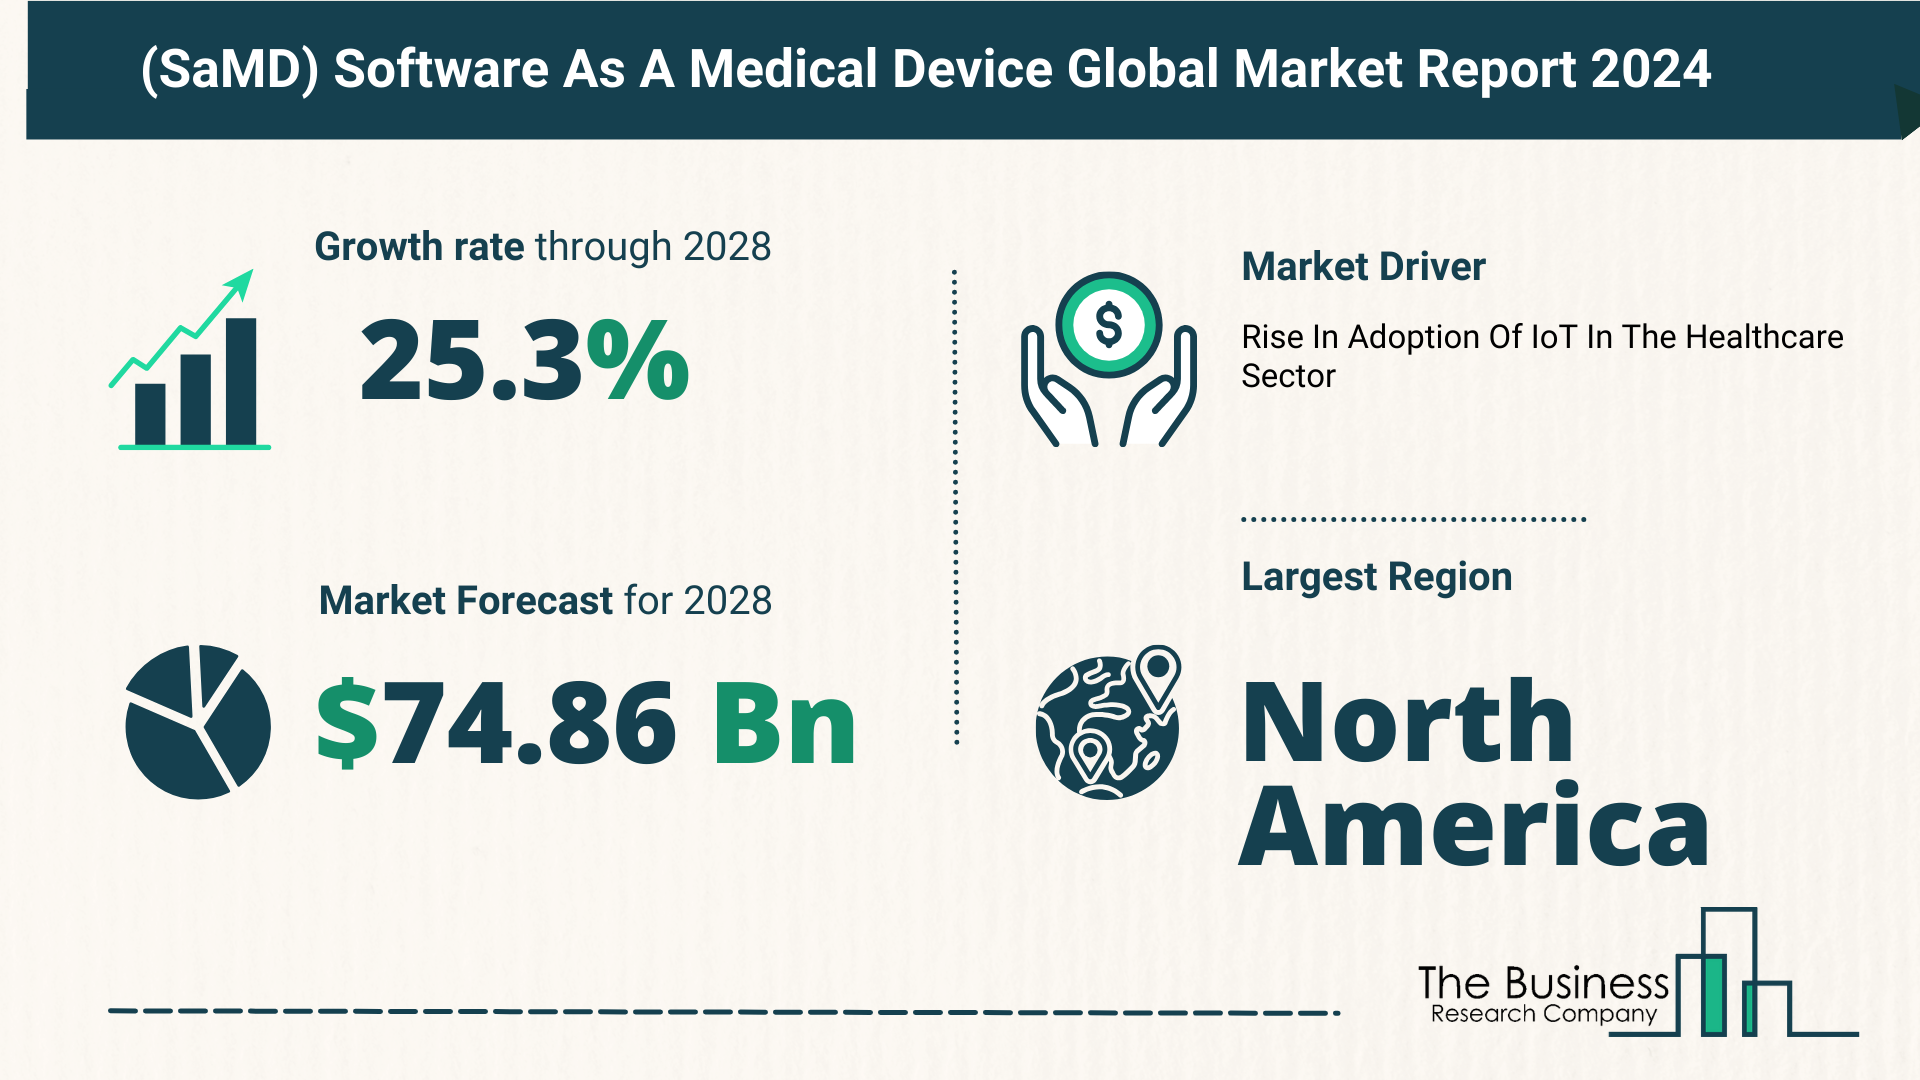 Understand How The (SaMD) Software As A Medical Device Market Is Poised To Grow Through 2024-2033